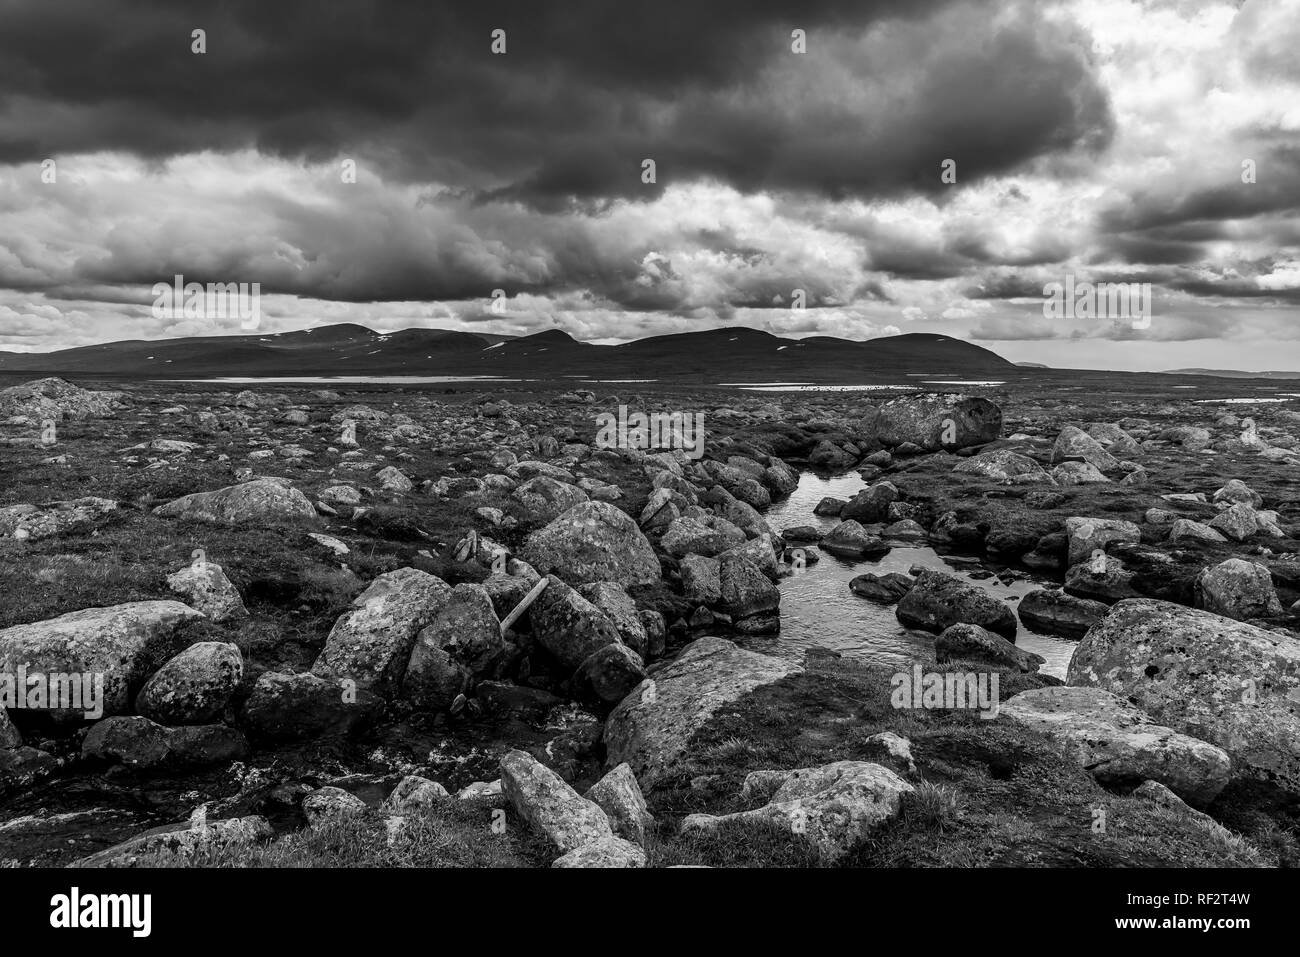 A view of rocky and stone terrain with stormy clouds covered with mountains in the background. Norway, around Beitostolen. Stock Photo